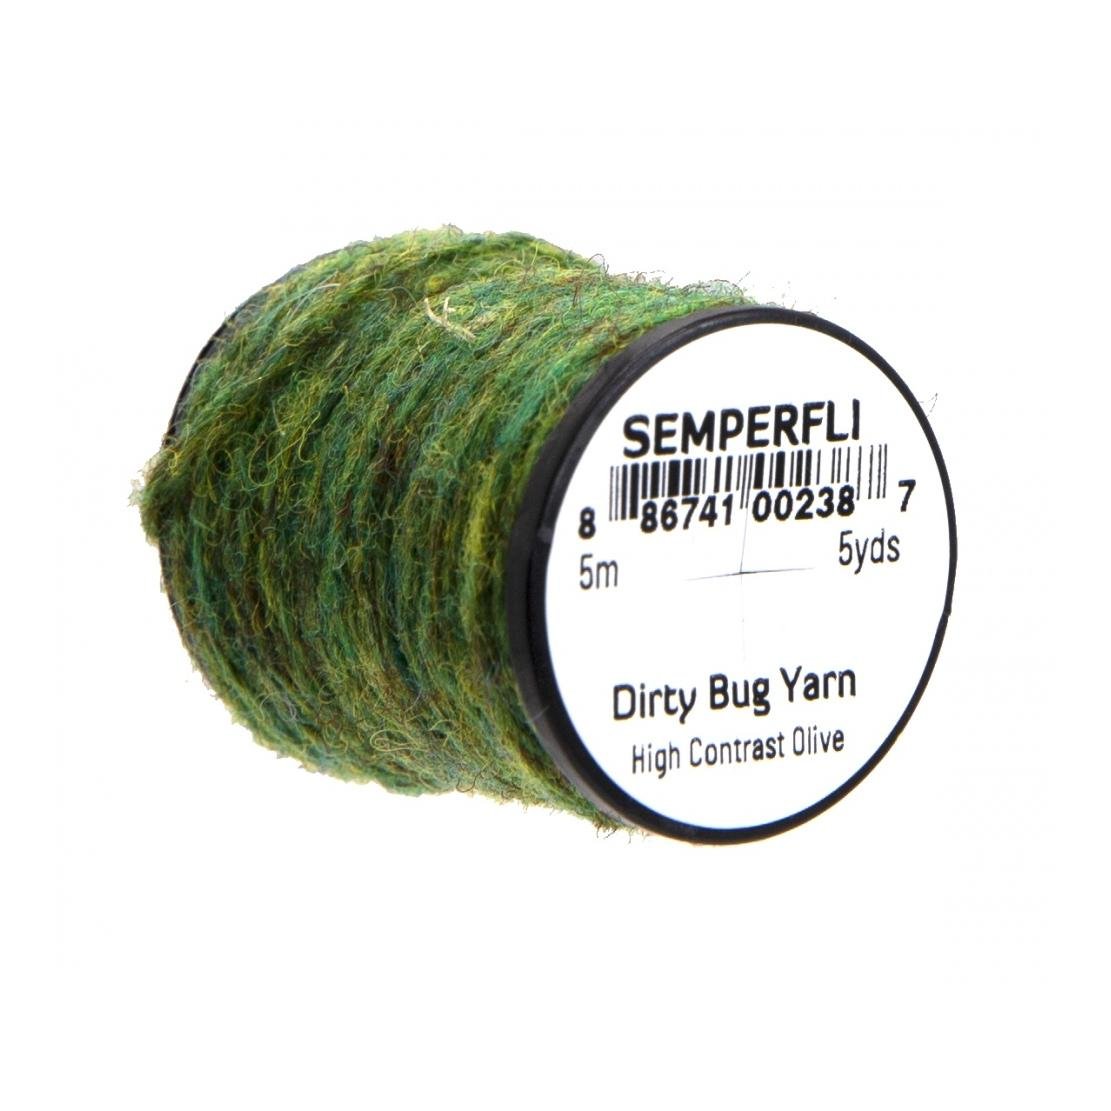 Image of Semperfli Dirty Bug Yarn High Contrast Olive bei fischen.ch